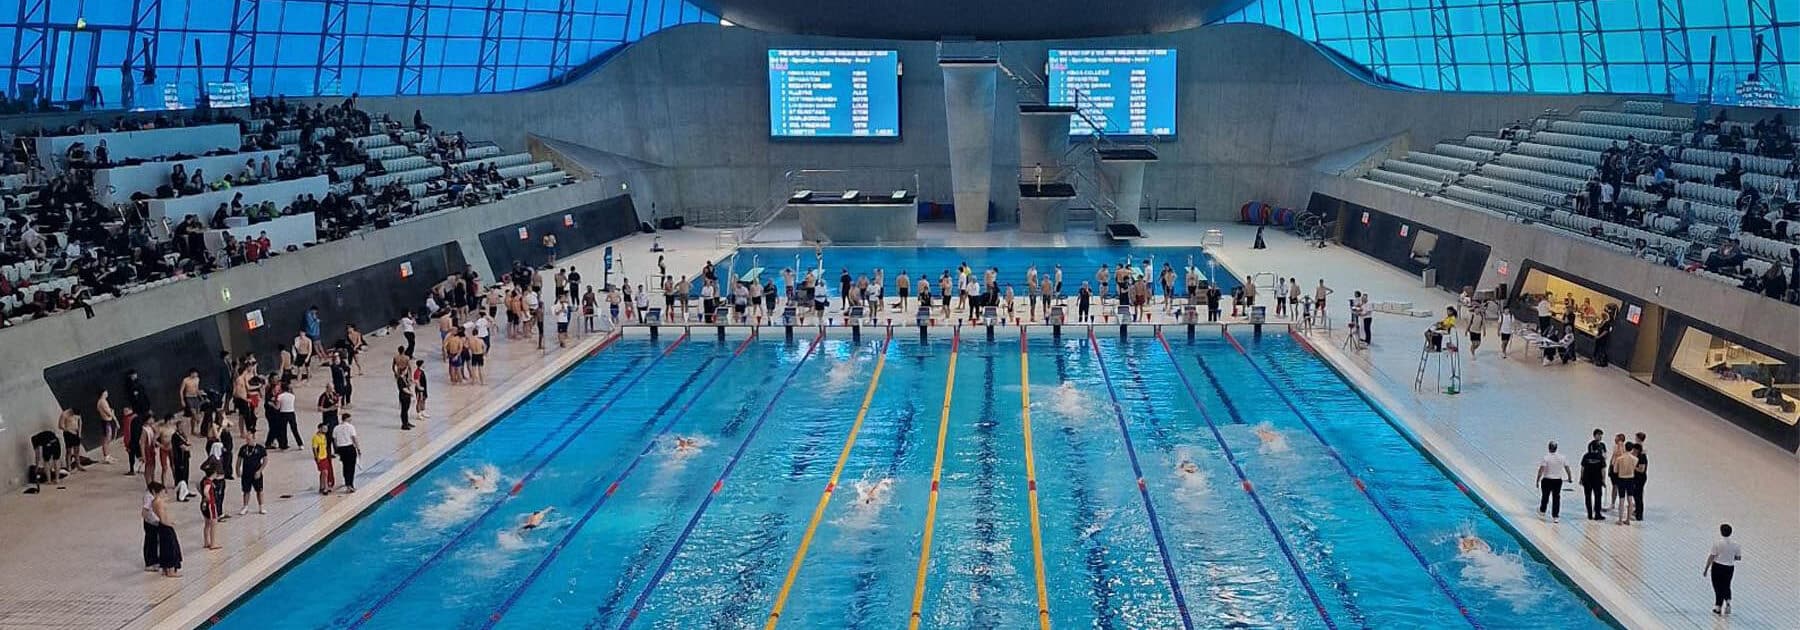 Swim Team Making Waves at the National Bath Cup